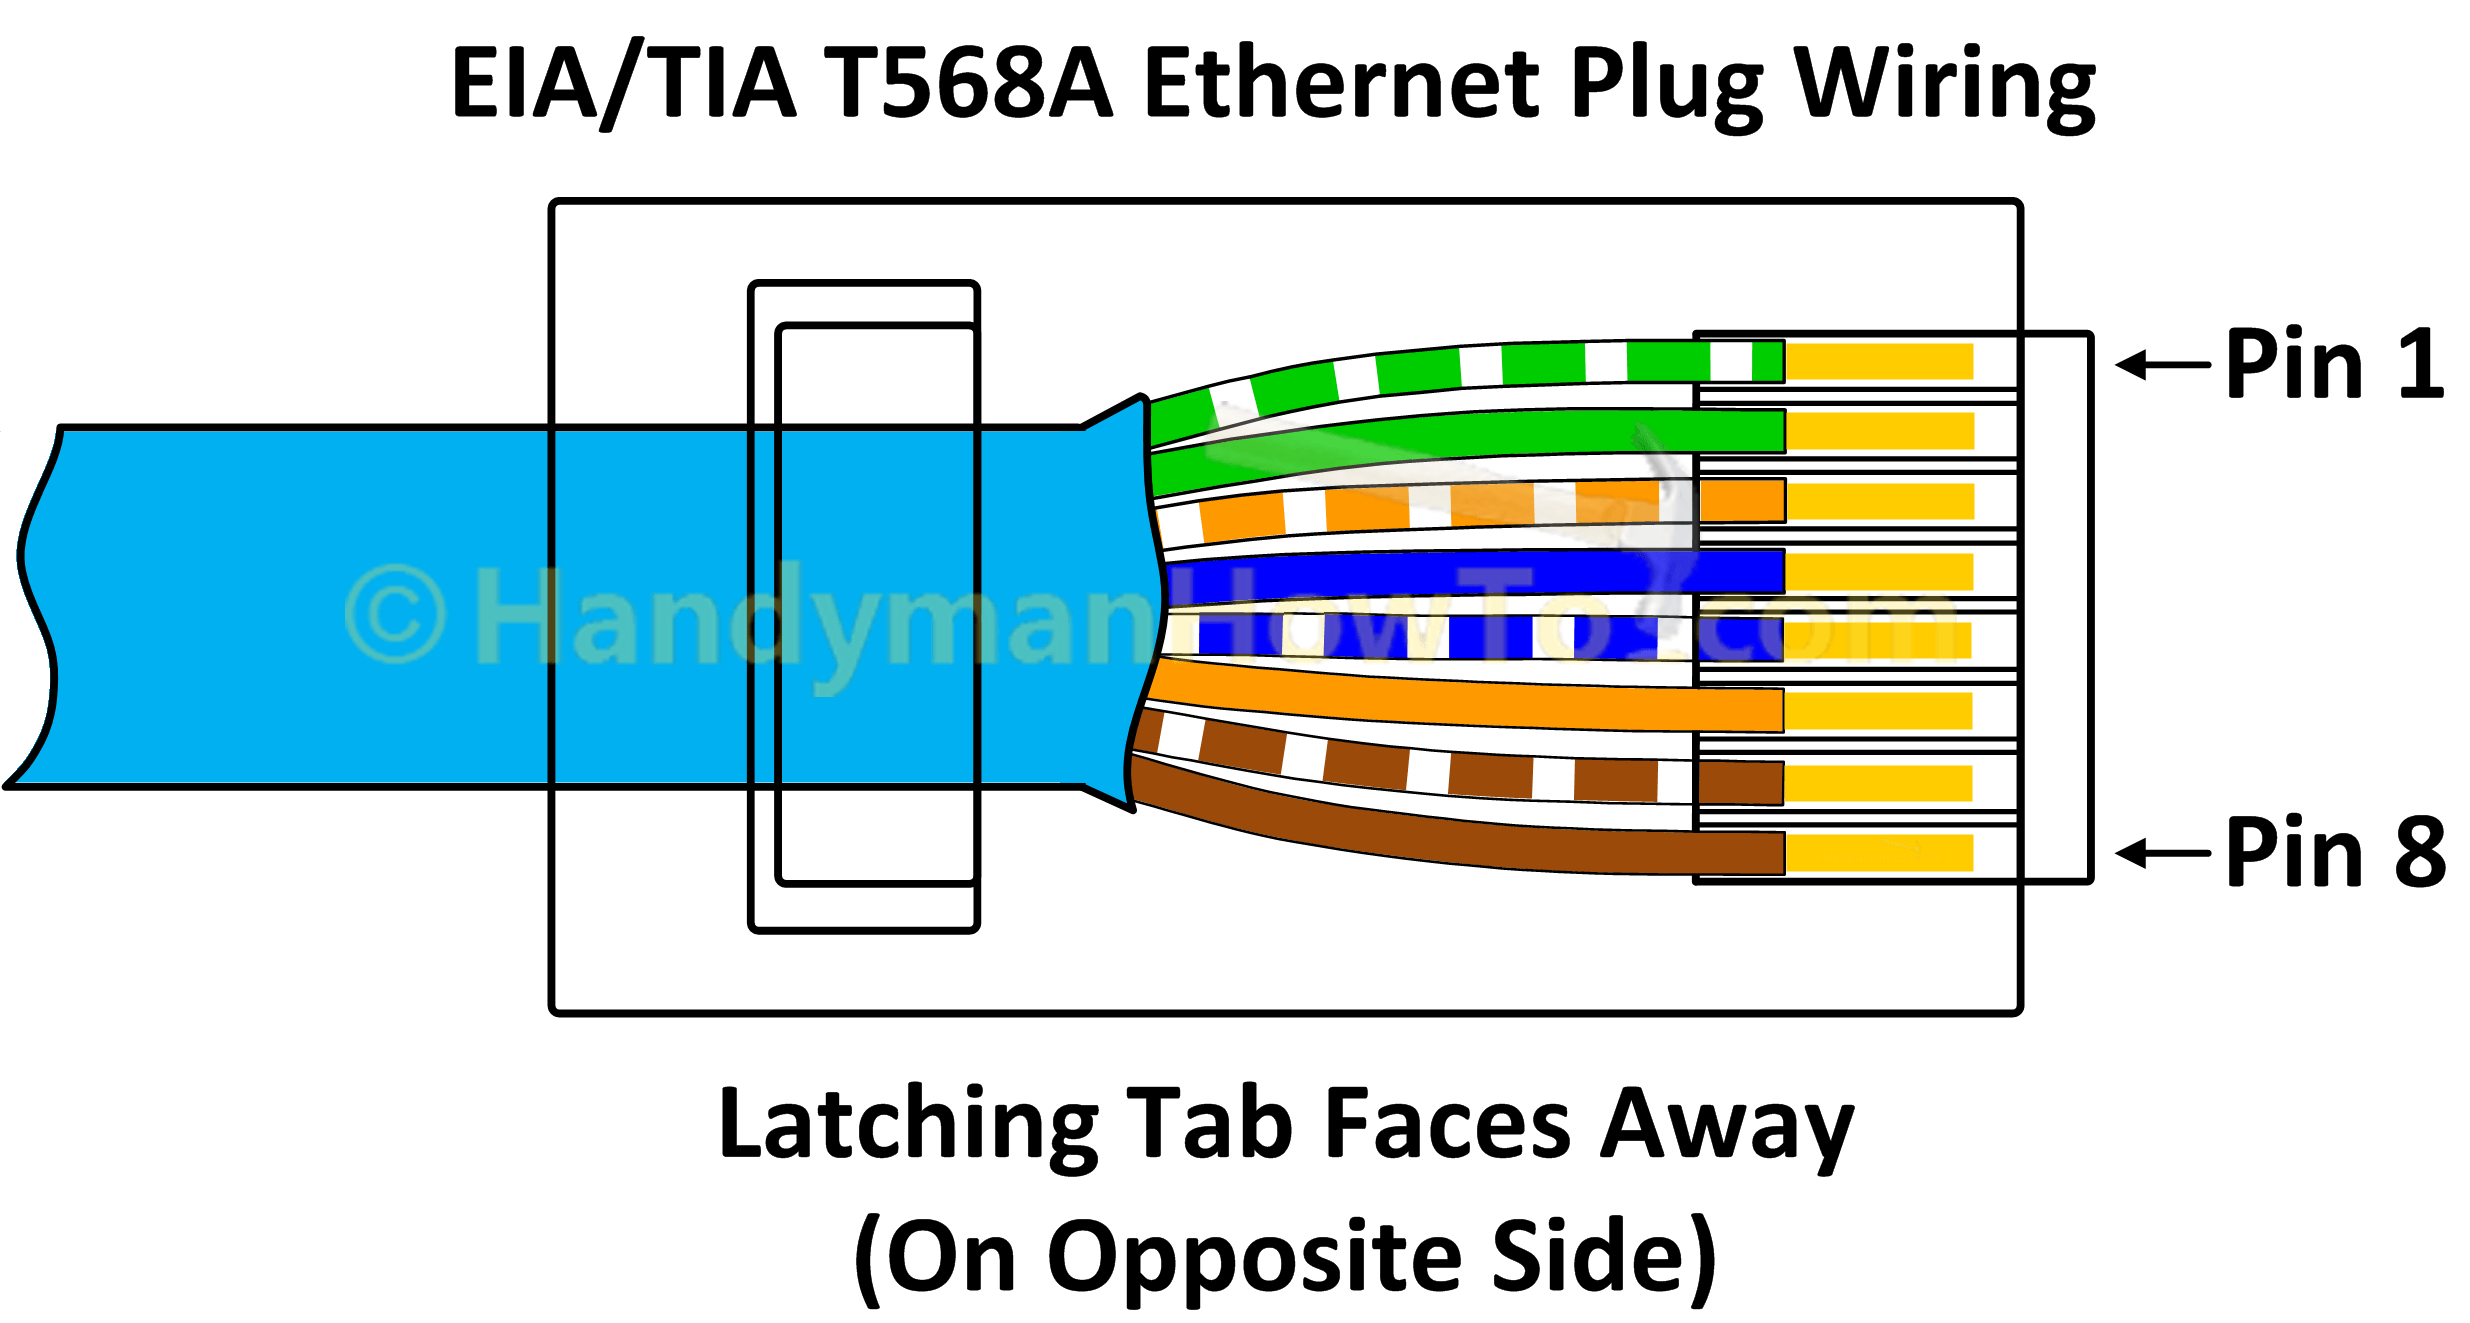 Cat 6 Ethernet Cable Wiring - Wiring Diagrams Hubs - Network Wiring Diagram